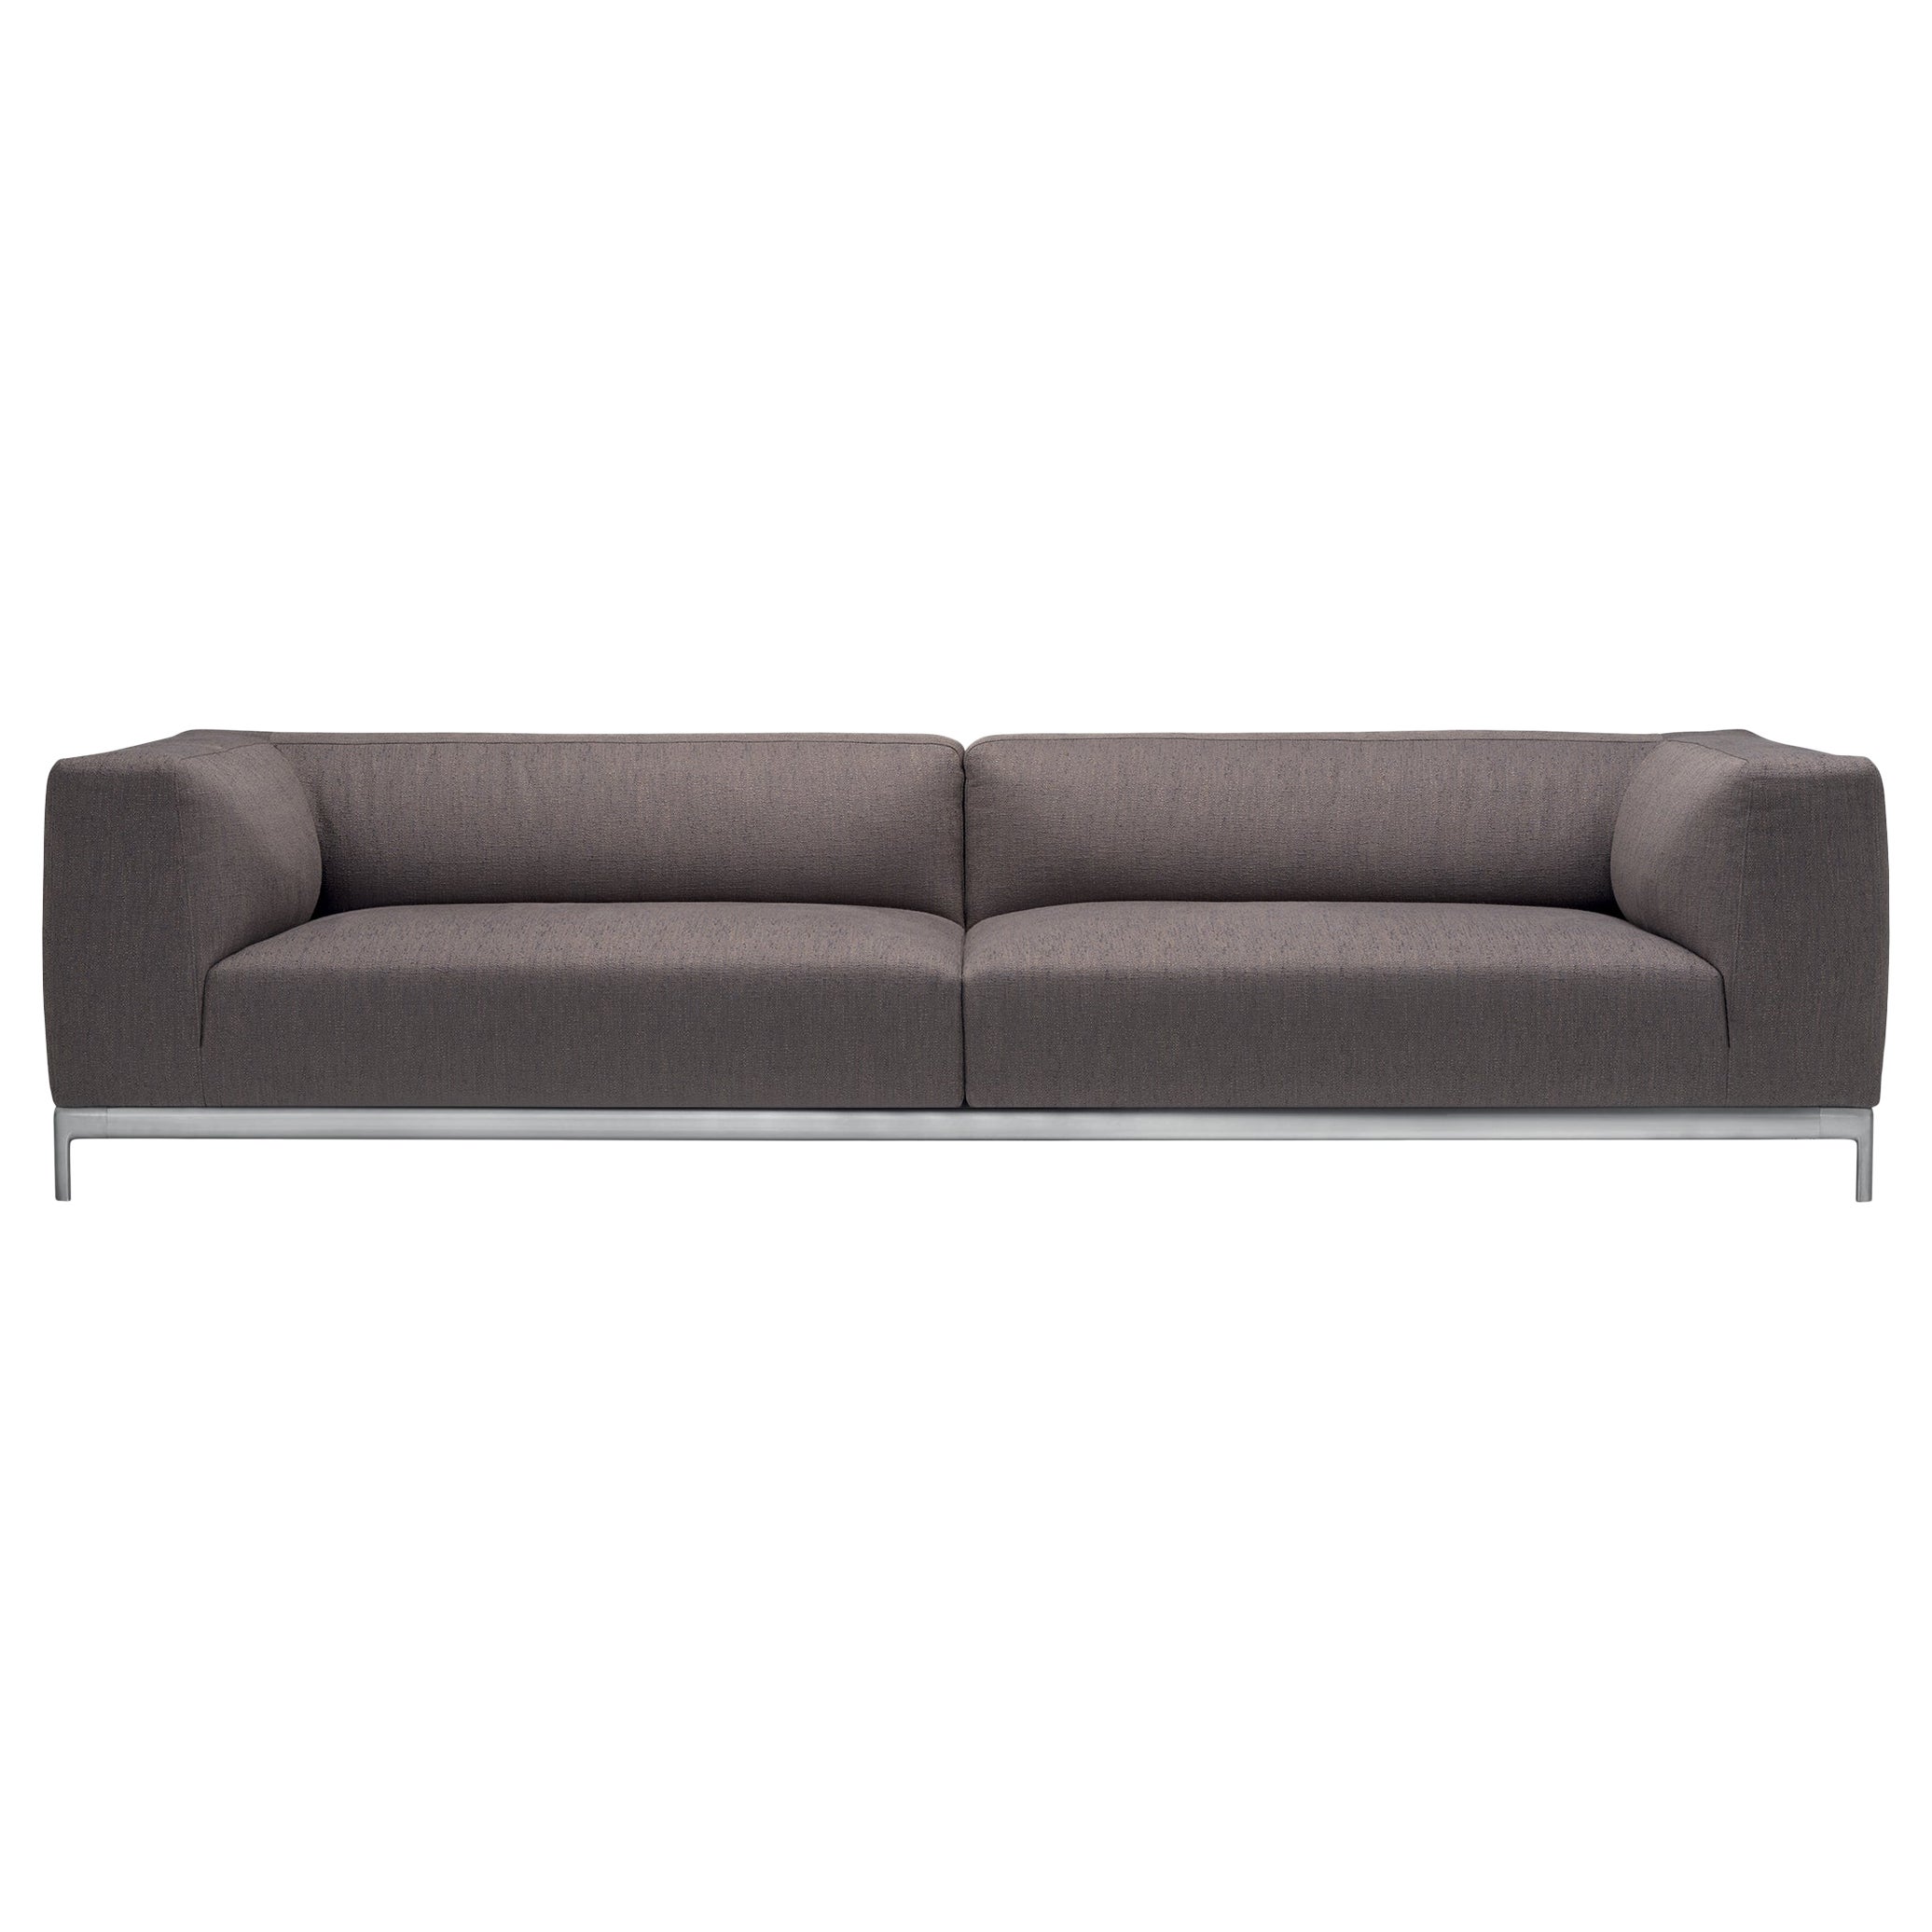 Alias P33 AluZen Soft Sofa 3 Seater with Upholstery and Lacquered Aluminum Frame